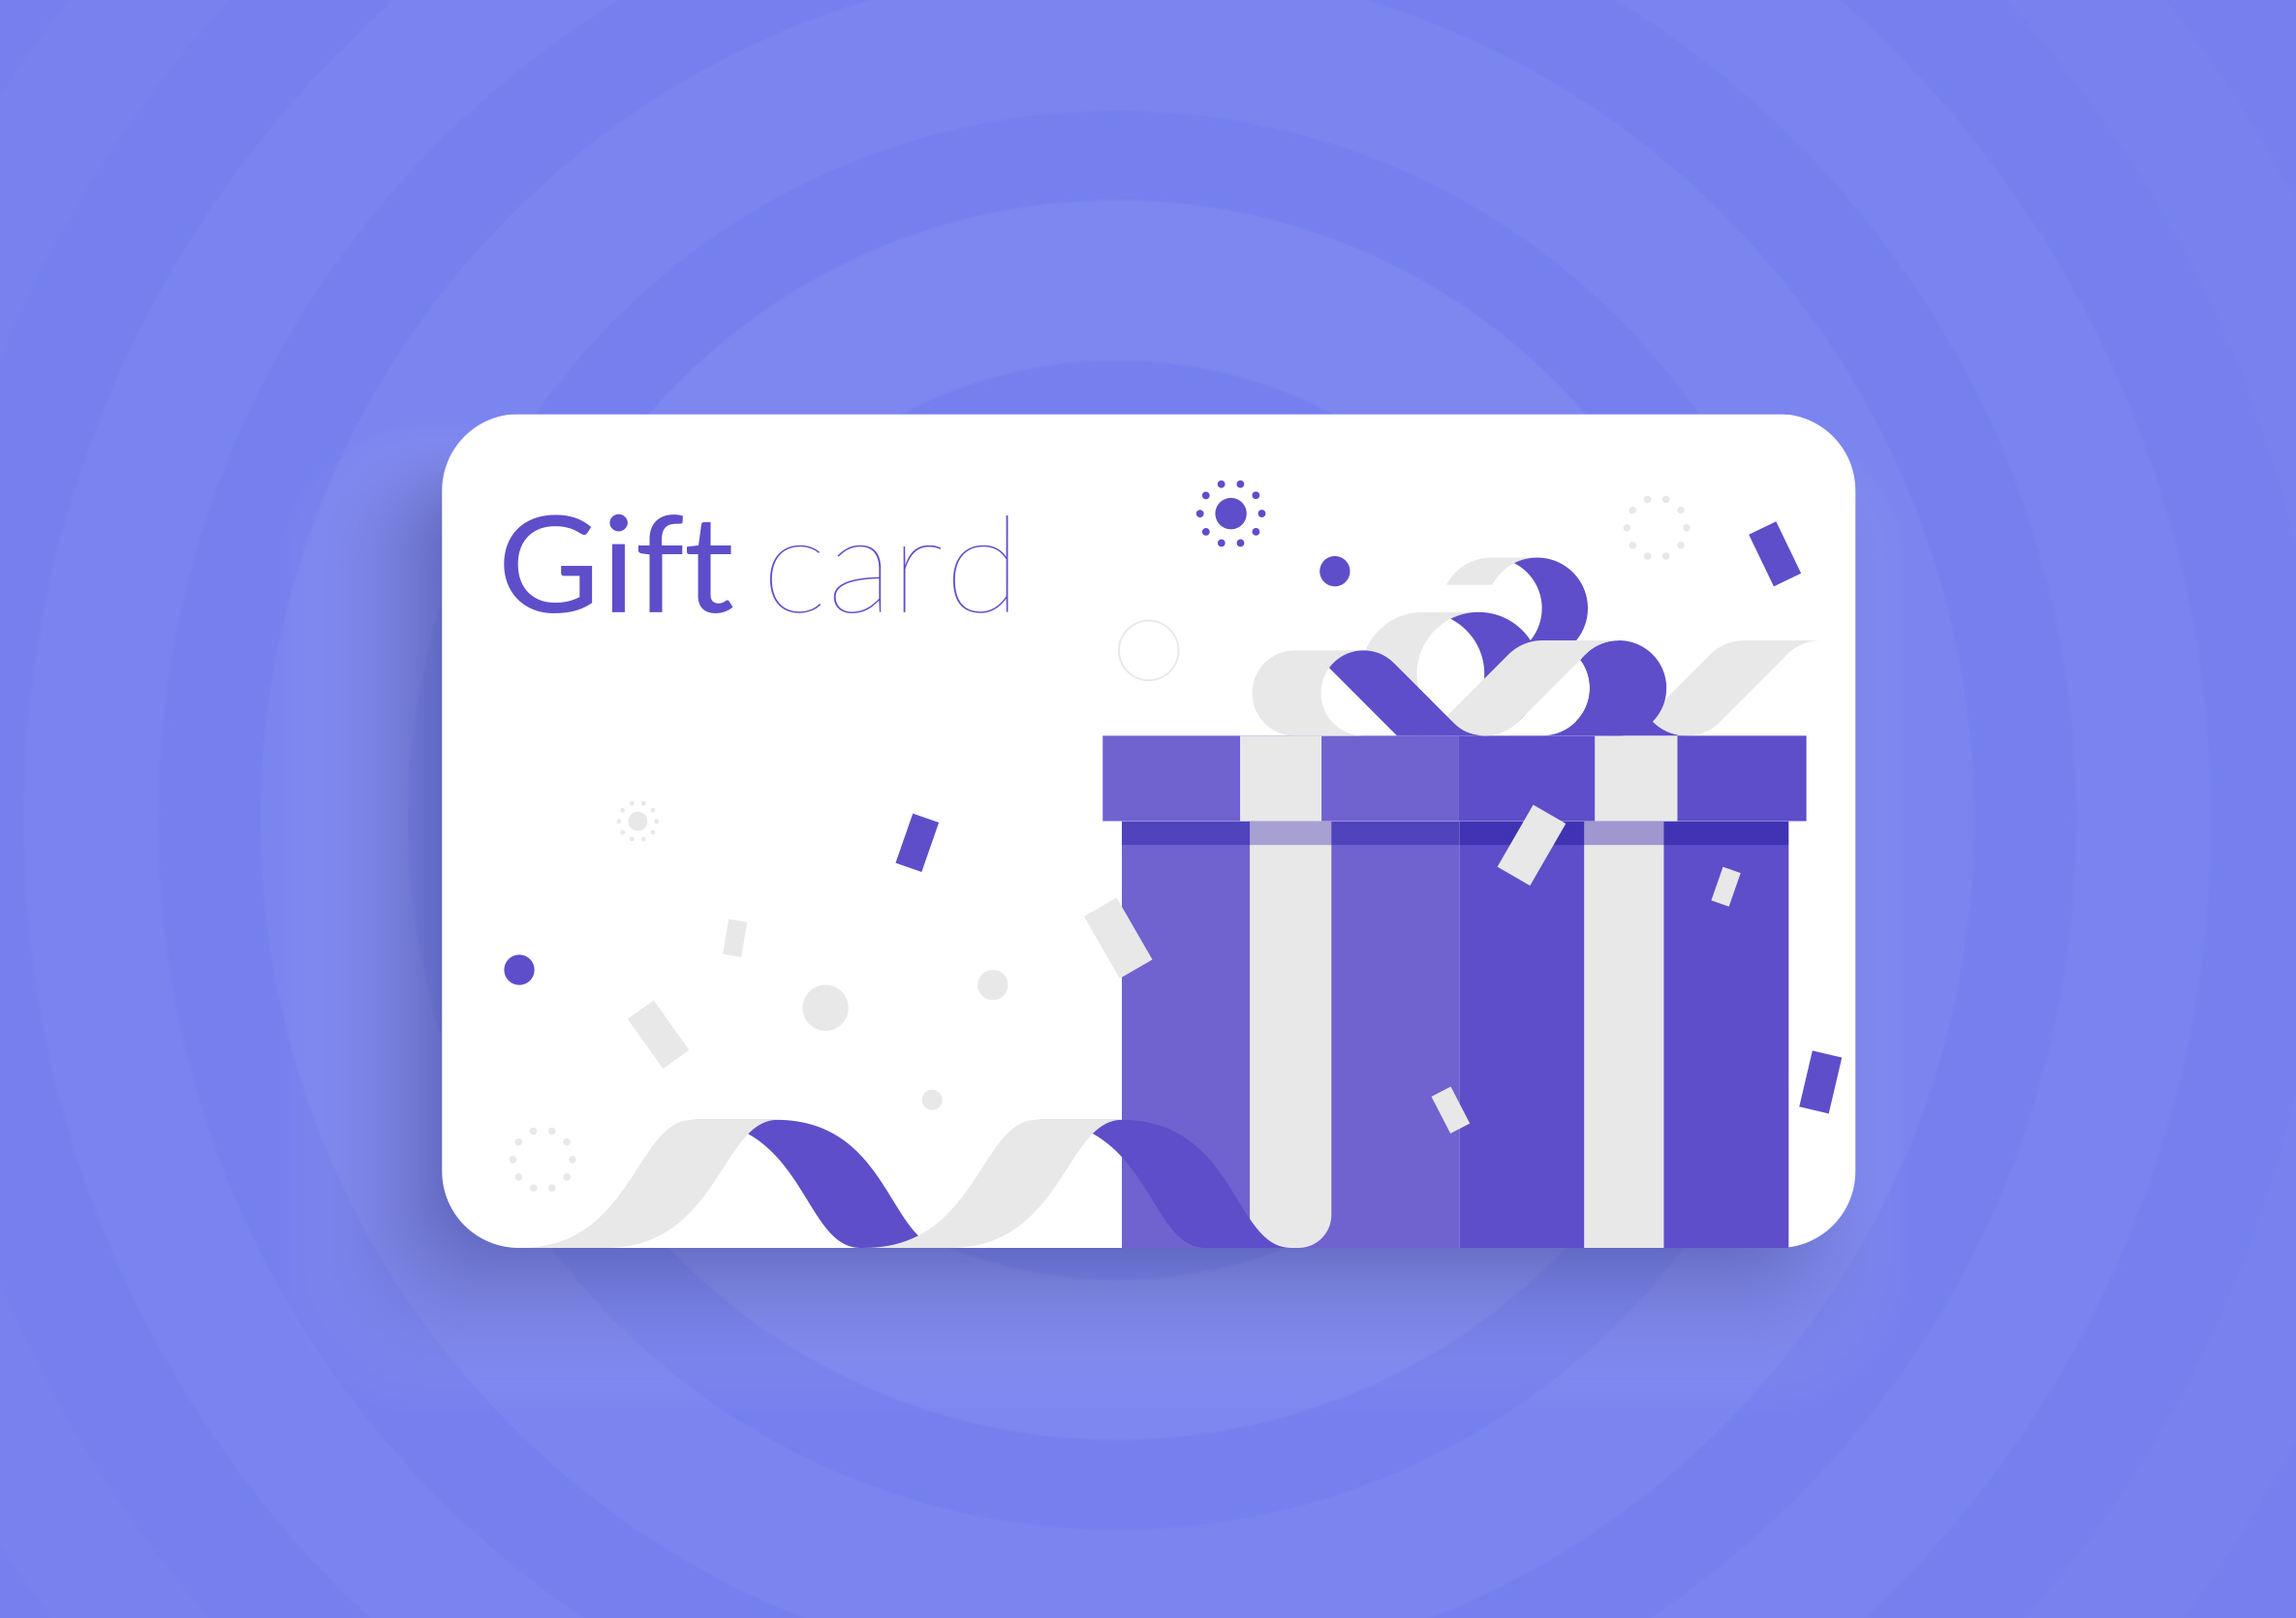 featured gift card image